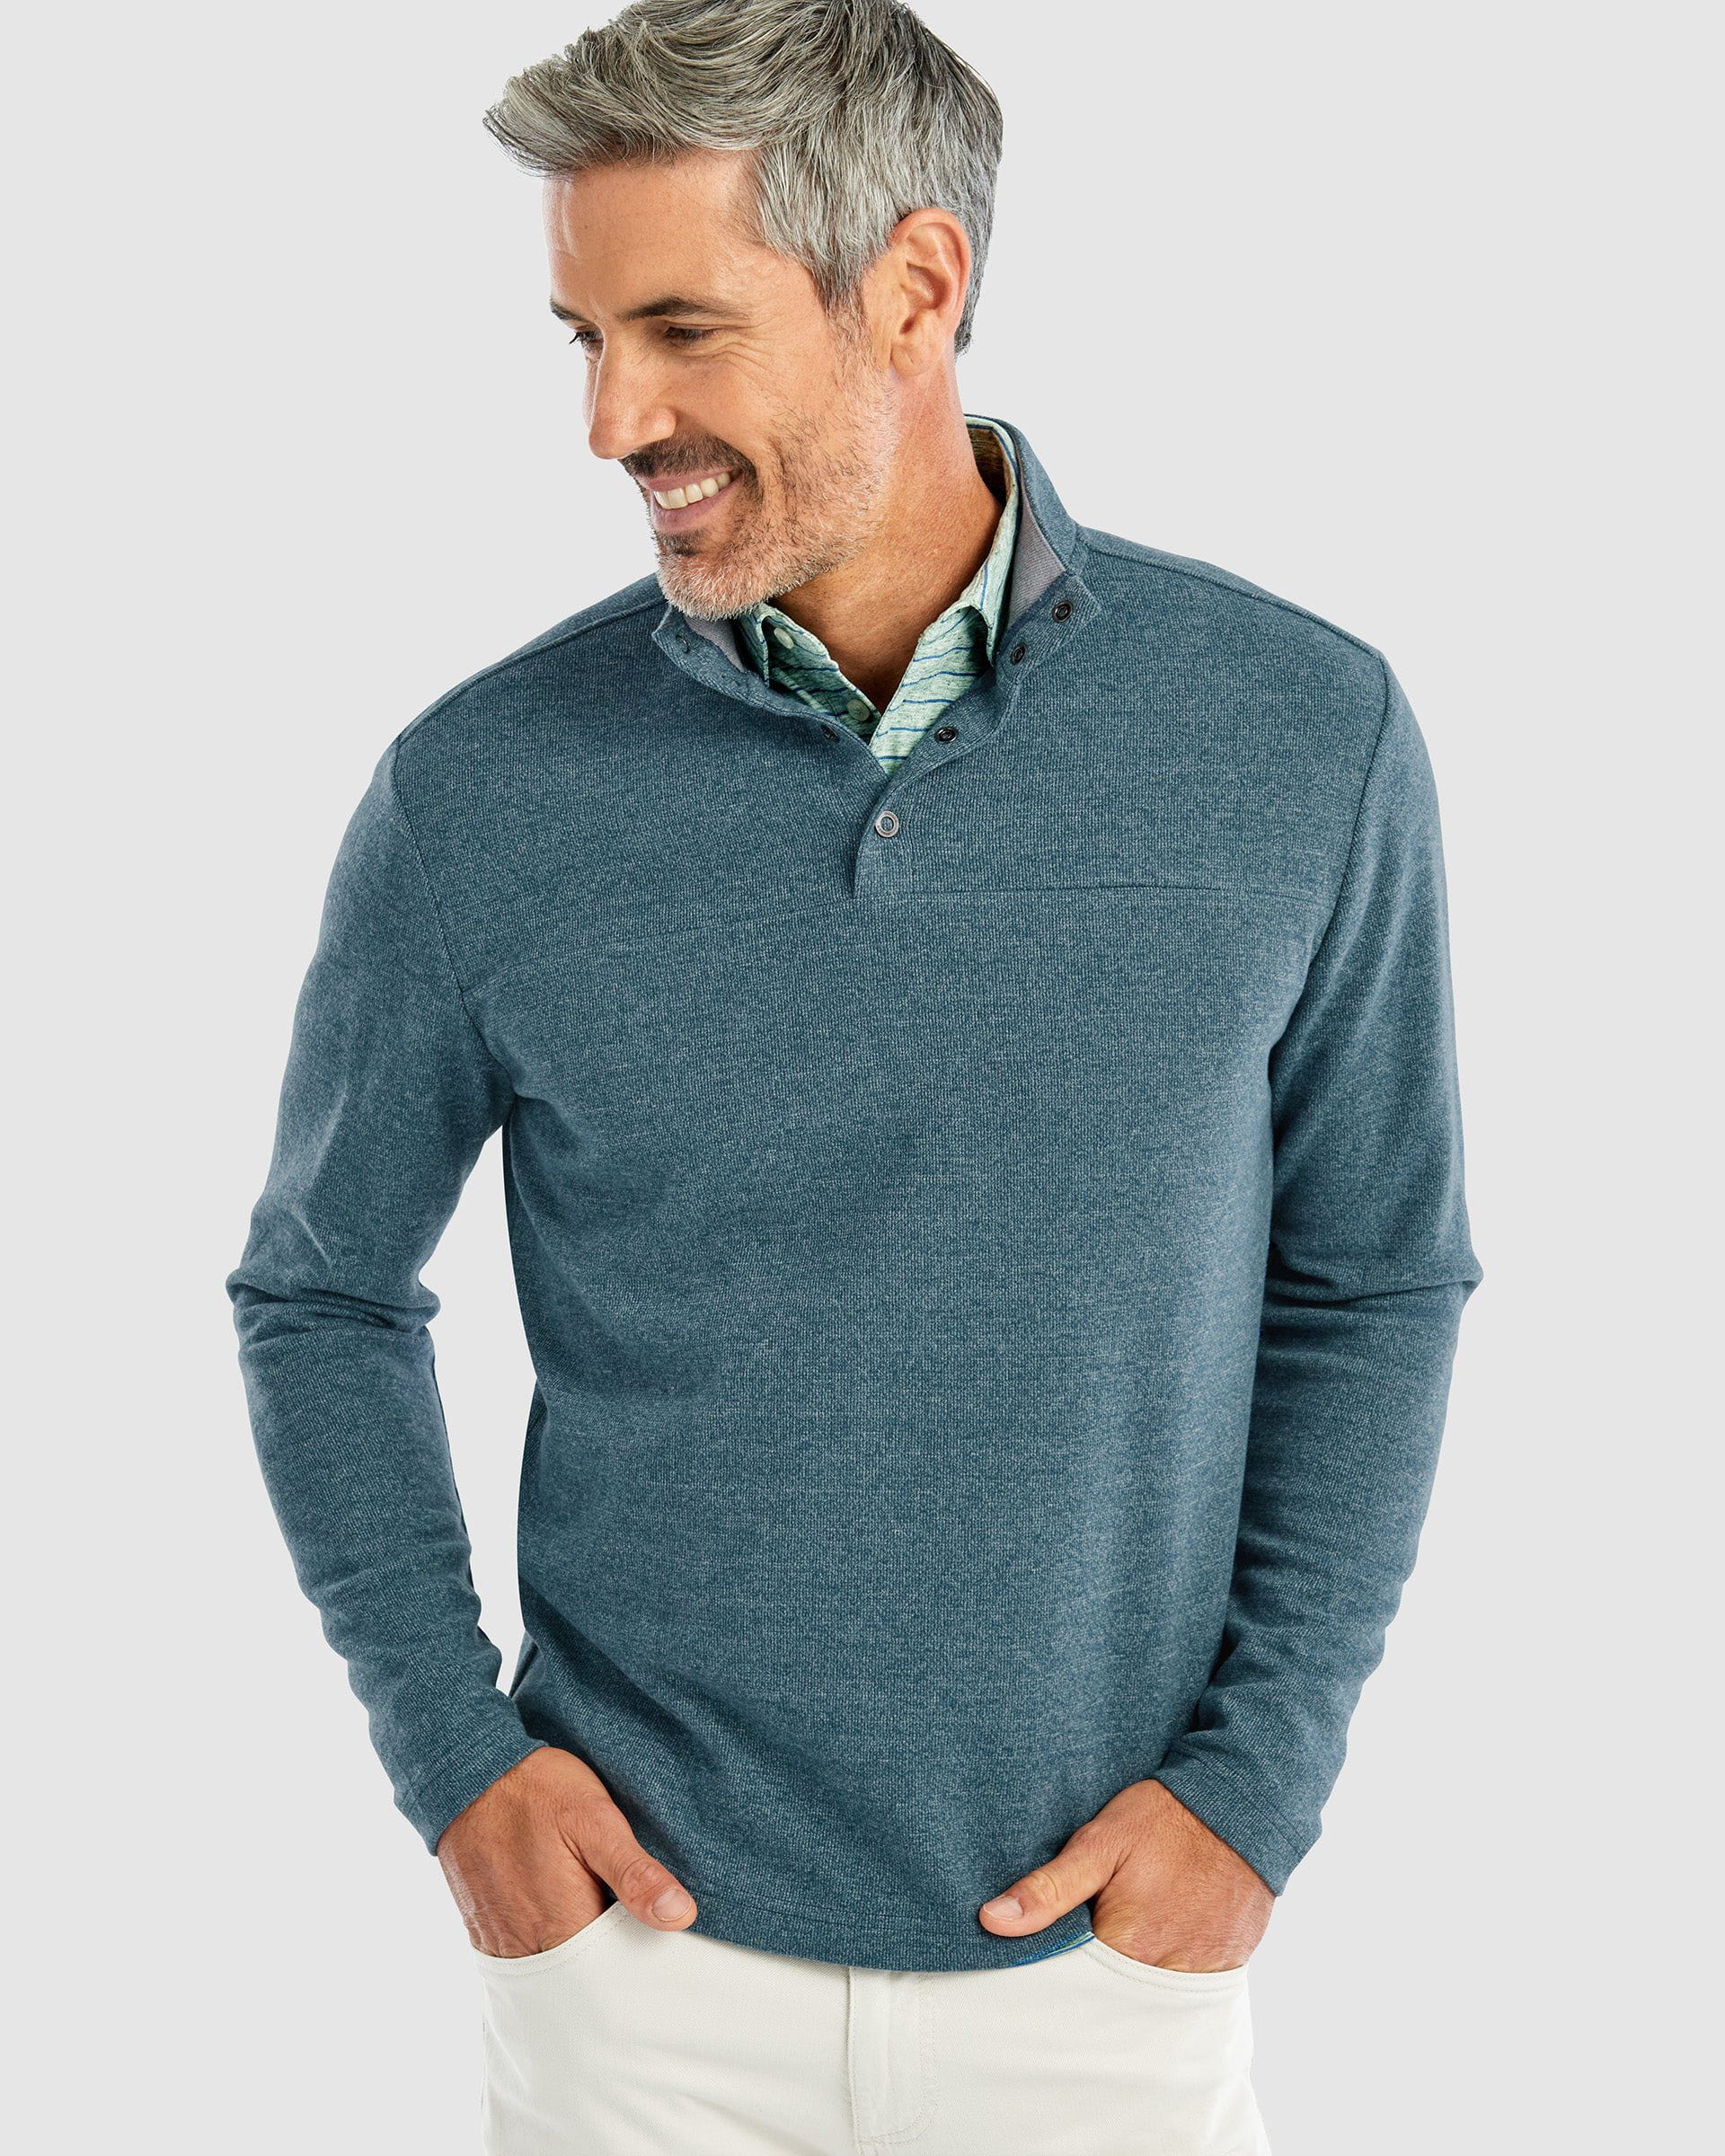 Johnnie-O Men's Dusty Henley Pullover Apparel Johnnie-O Small Pacific 